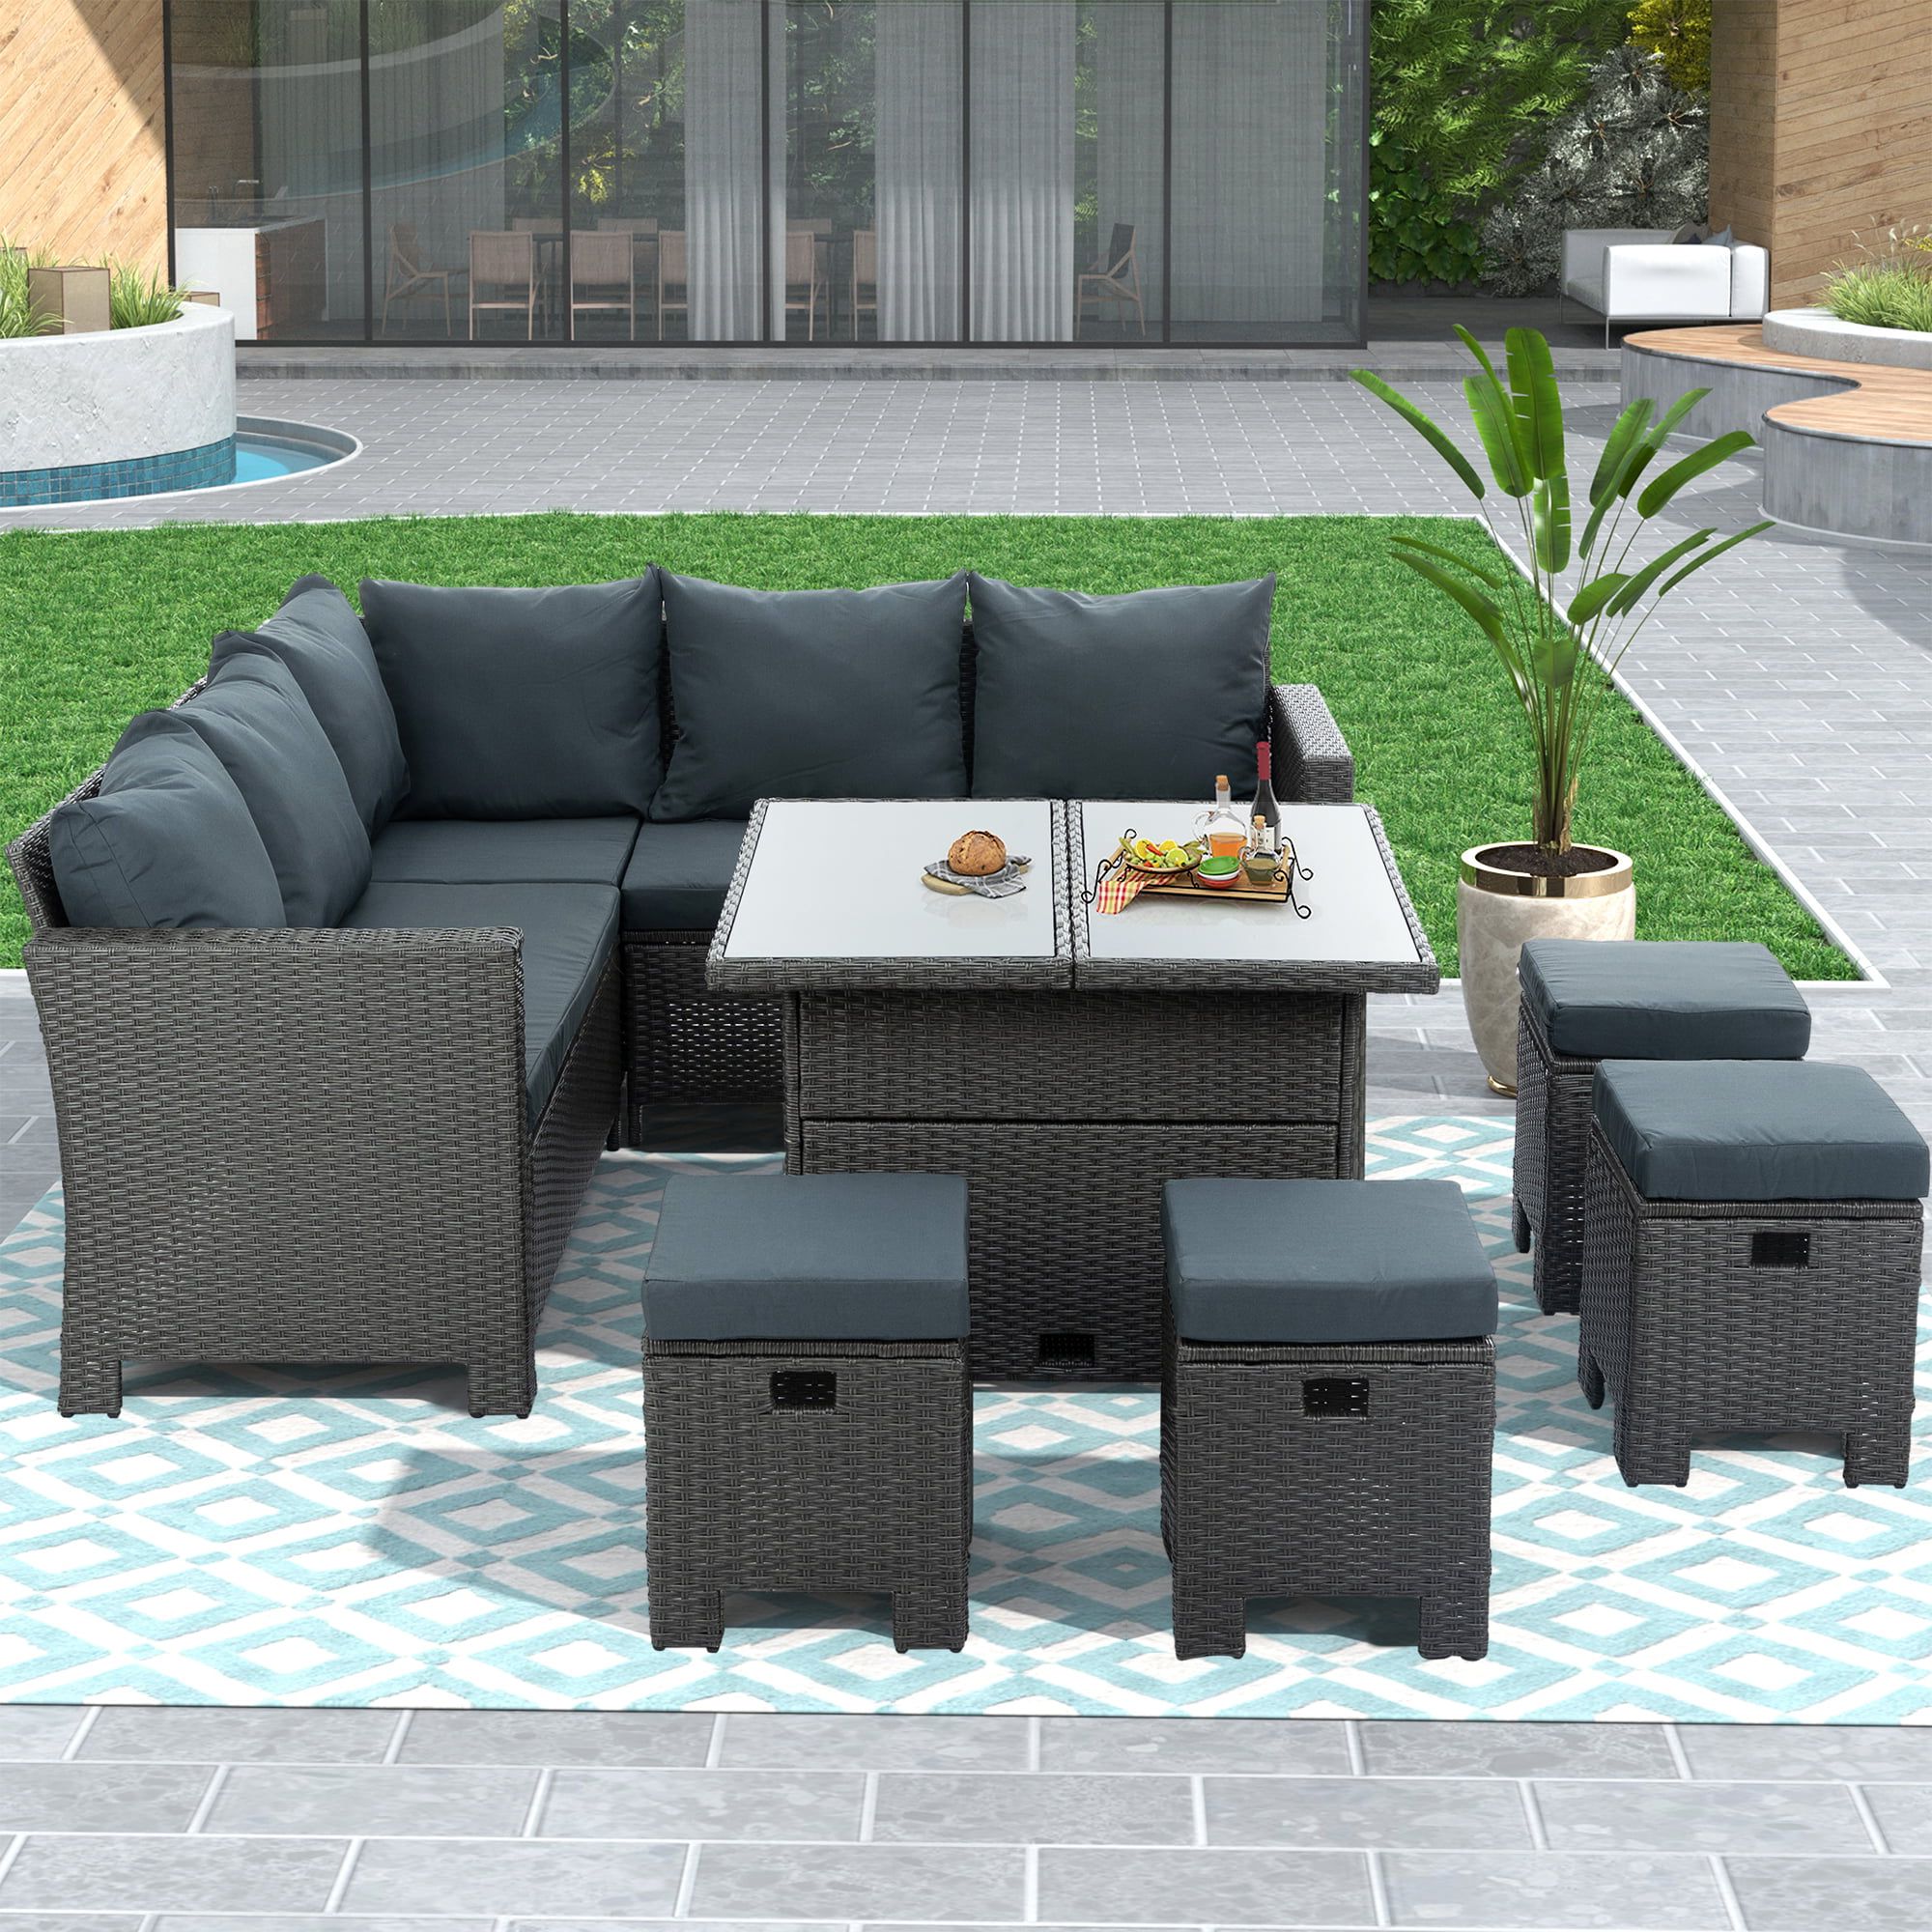 Well Known 8 Piece Patio Rattan Outdoor Furniture Set With Highsound Patio Furniture Set, 8 Piece Rattan Wicker Conversation Set,  Outdoor Sectional Sofa With Table And Ottoman, Gray – Walmart (View 2 of 15)